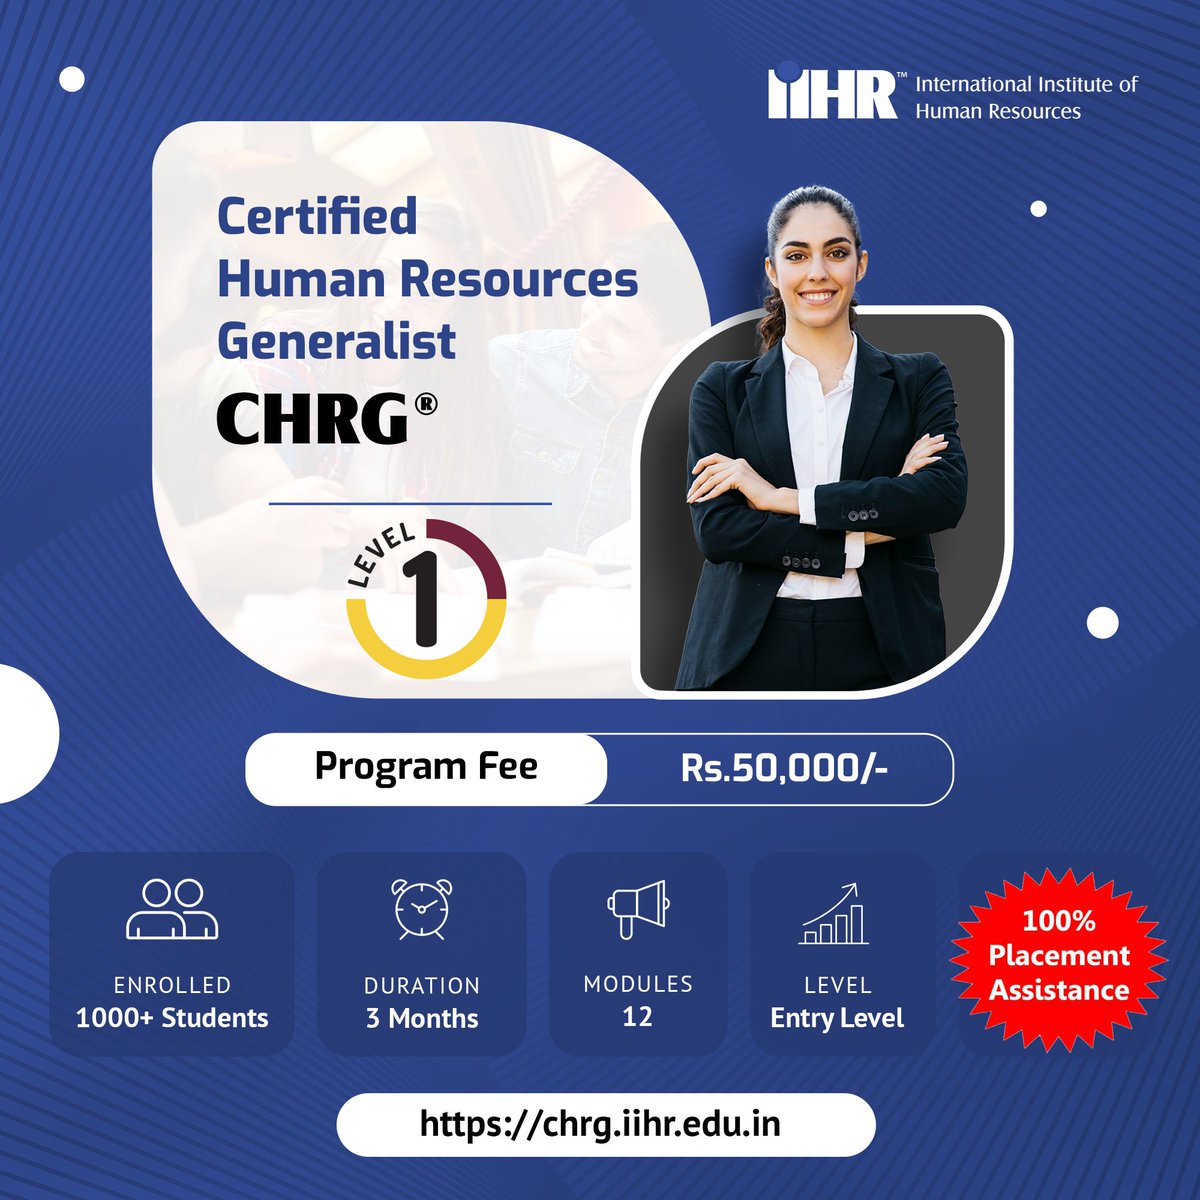 🌟 Elevate your career in HR! Join our Certified Human Resources Generalist program - 3 months of intensive training with 100% Placement Assistance. Visit chrg.iihr.edu.in or call/WhatsApp 703 703 4447. 🎓💼 #HRGeneralist  hrcourses #hrcertifications #iihr#hrtraining